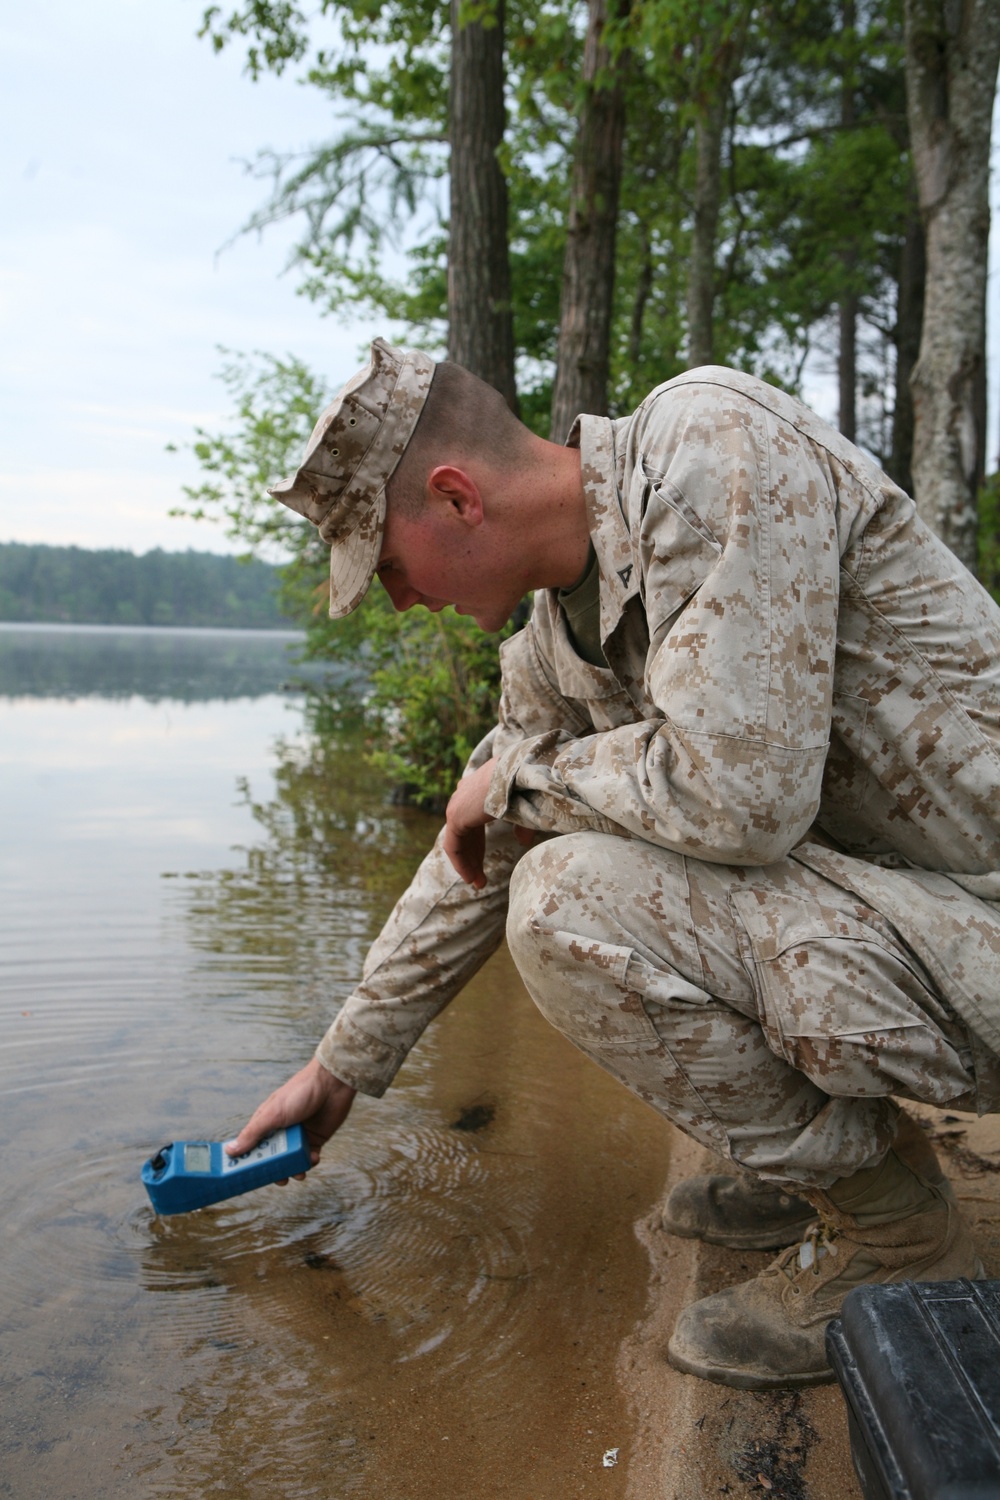 Water technicians supply critical resource at Fort Bragg